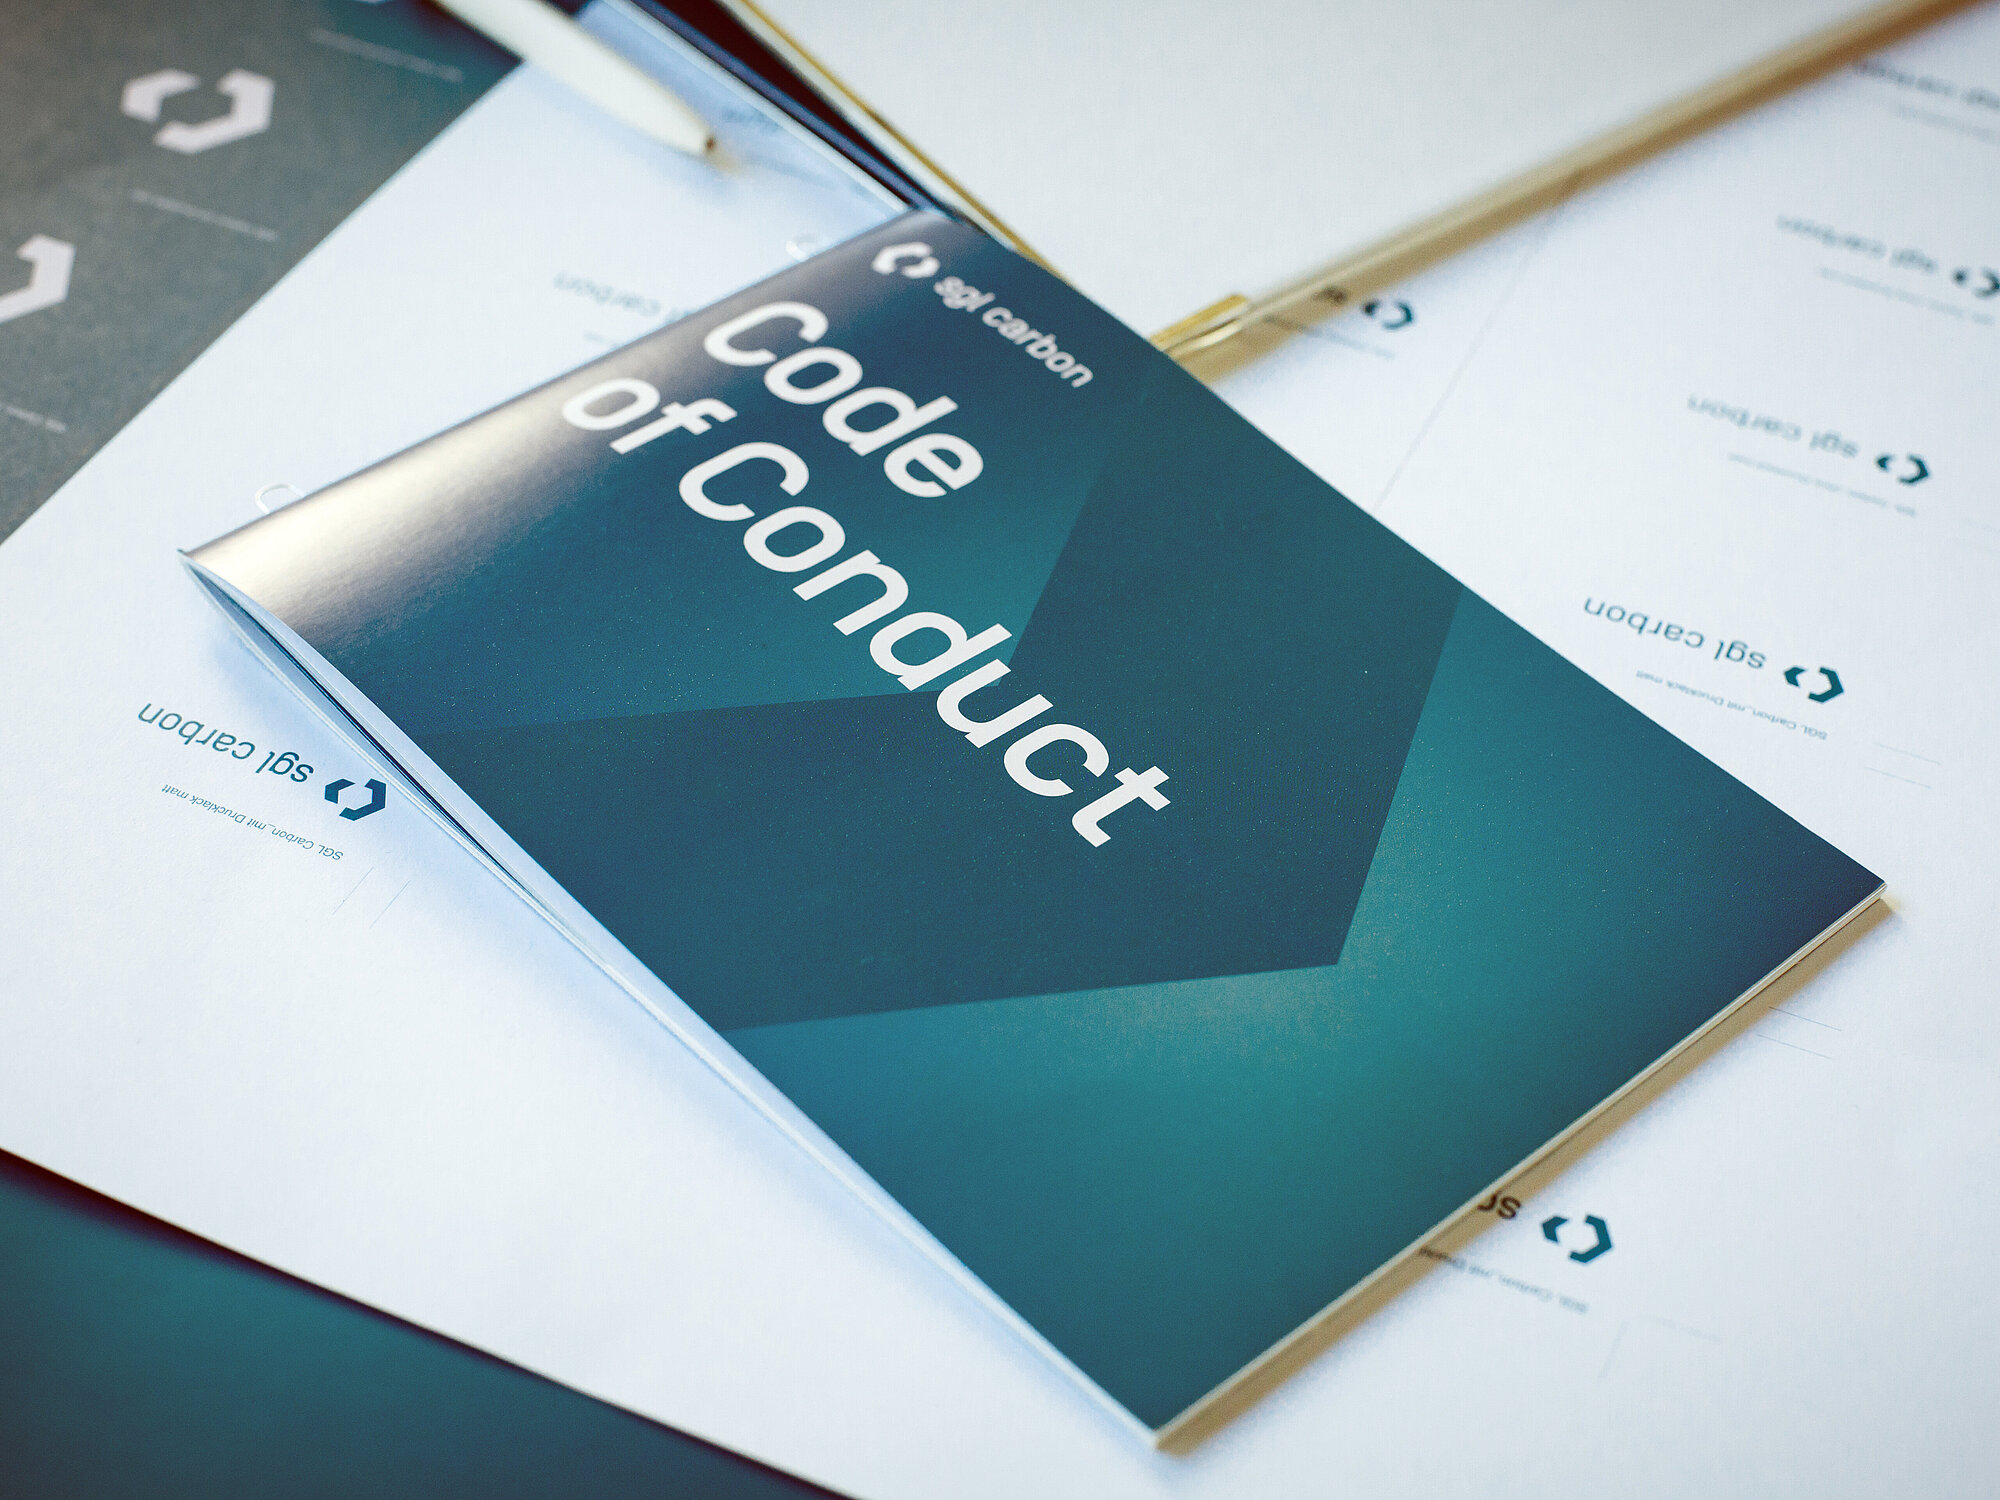 Find out more about compliance at SGL, about our Code of Conduct, and about how we take effective action against misconduct and corruption.